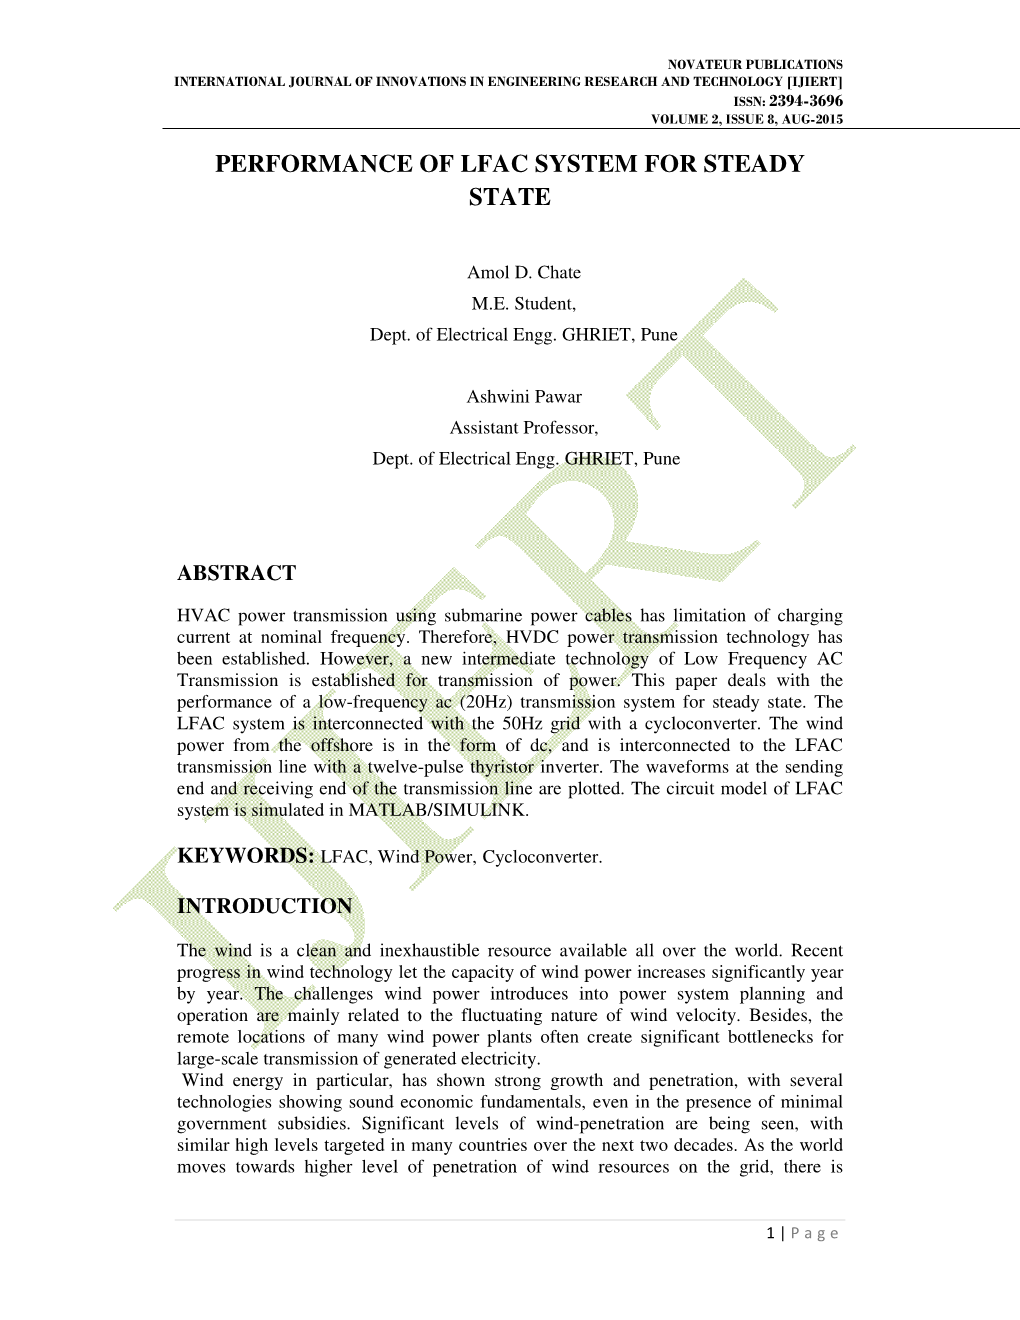 Performance of Lfac System for Steady State